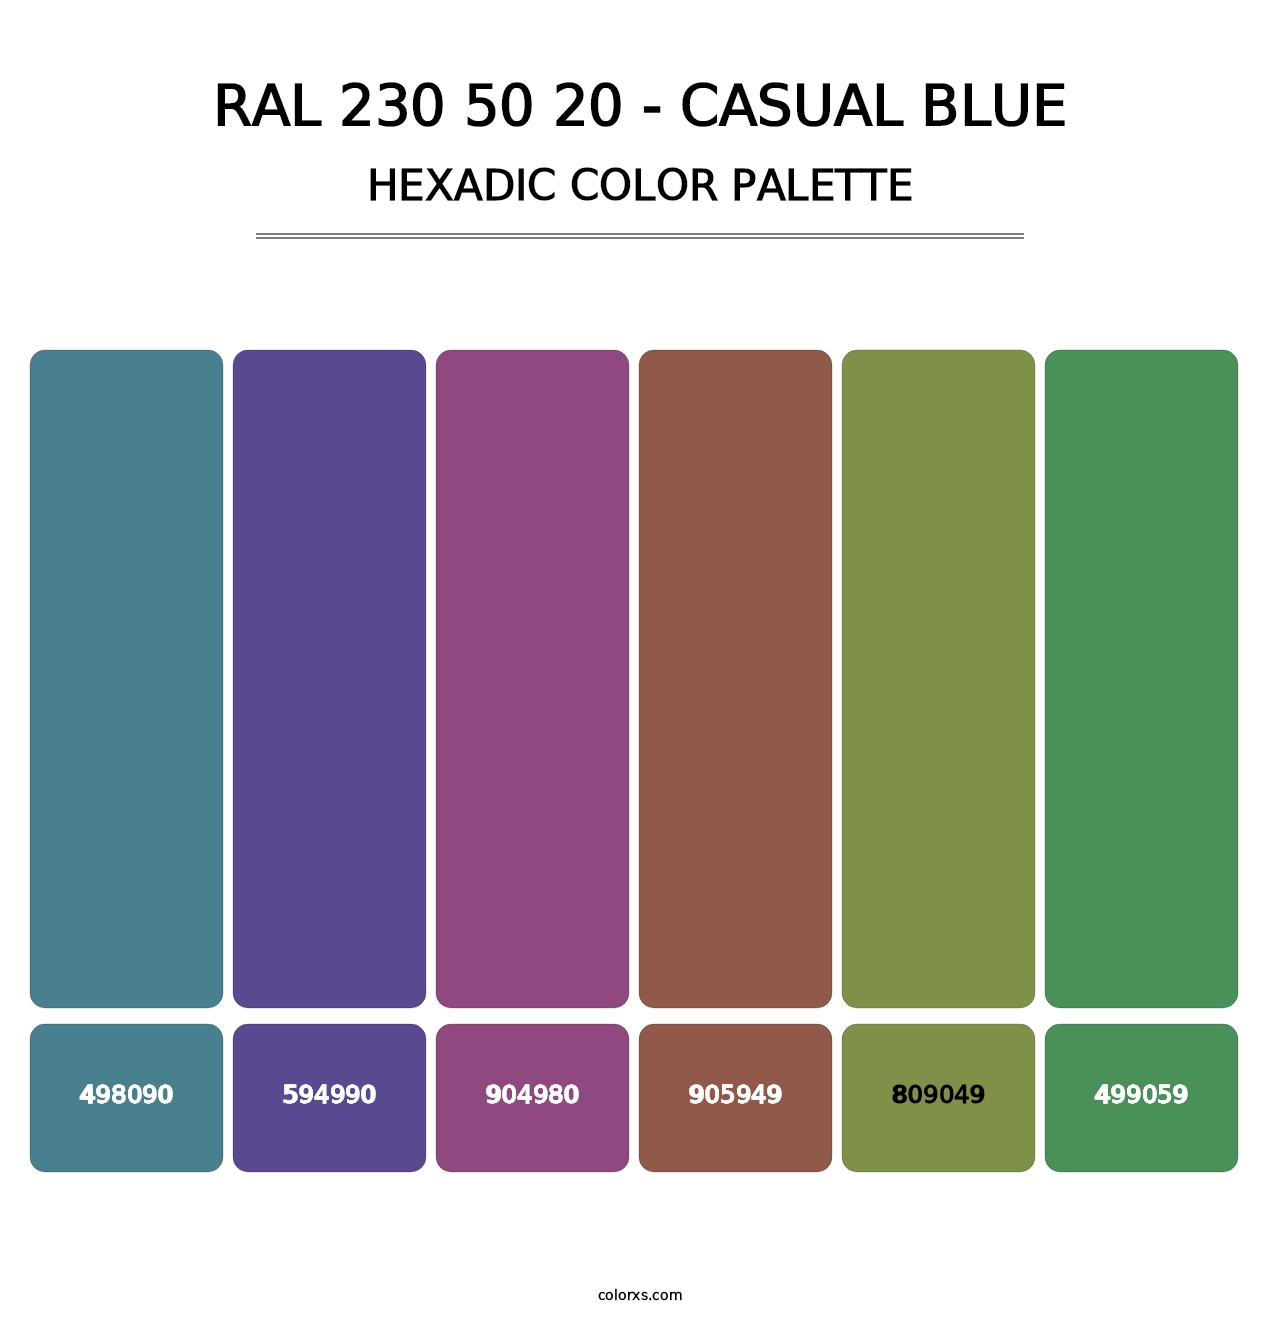 RAL 230 50 20 - Casual Blue - Hexadic Color Palette